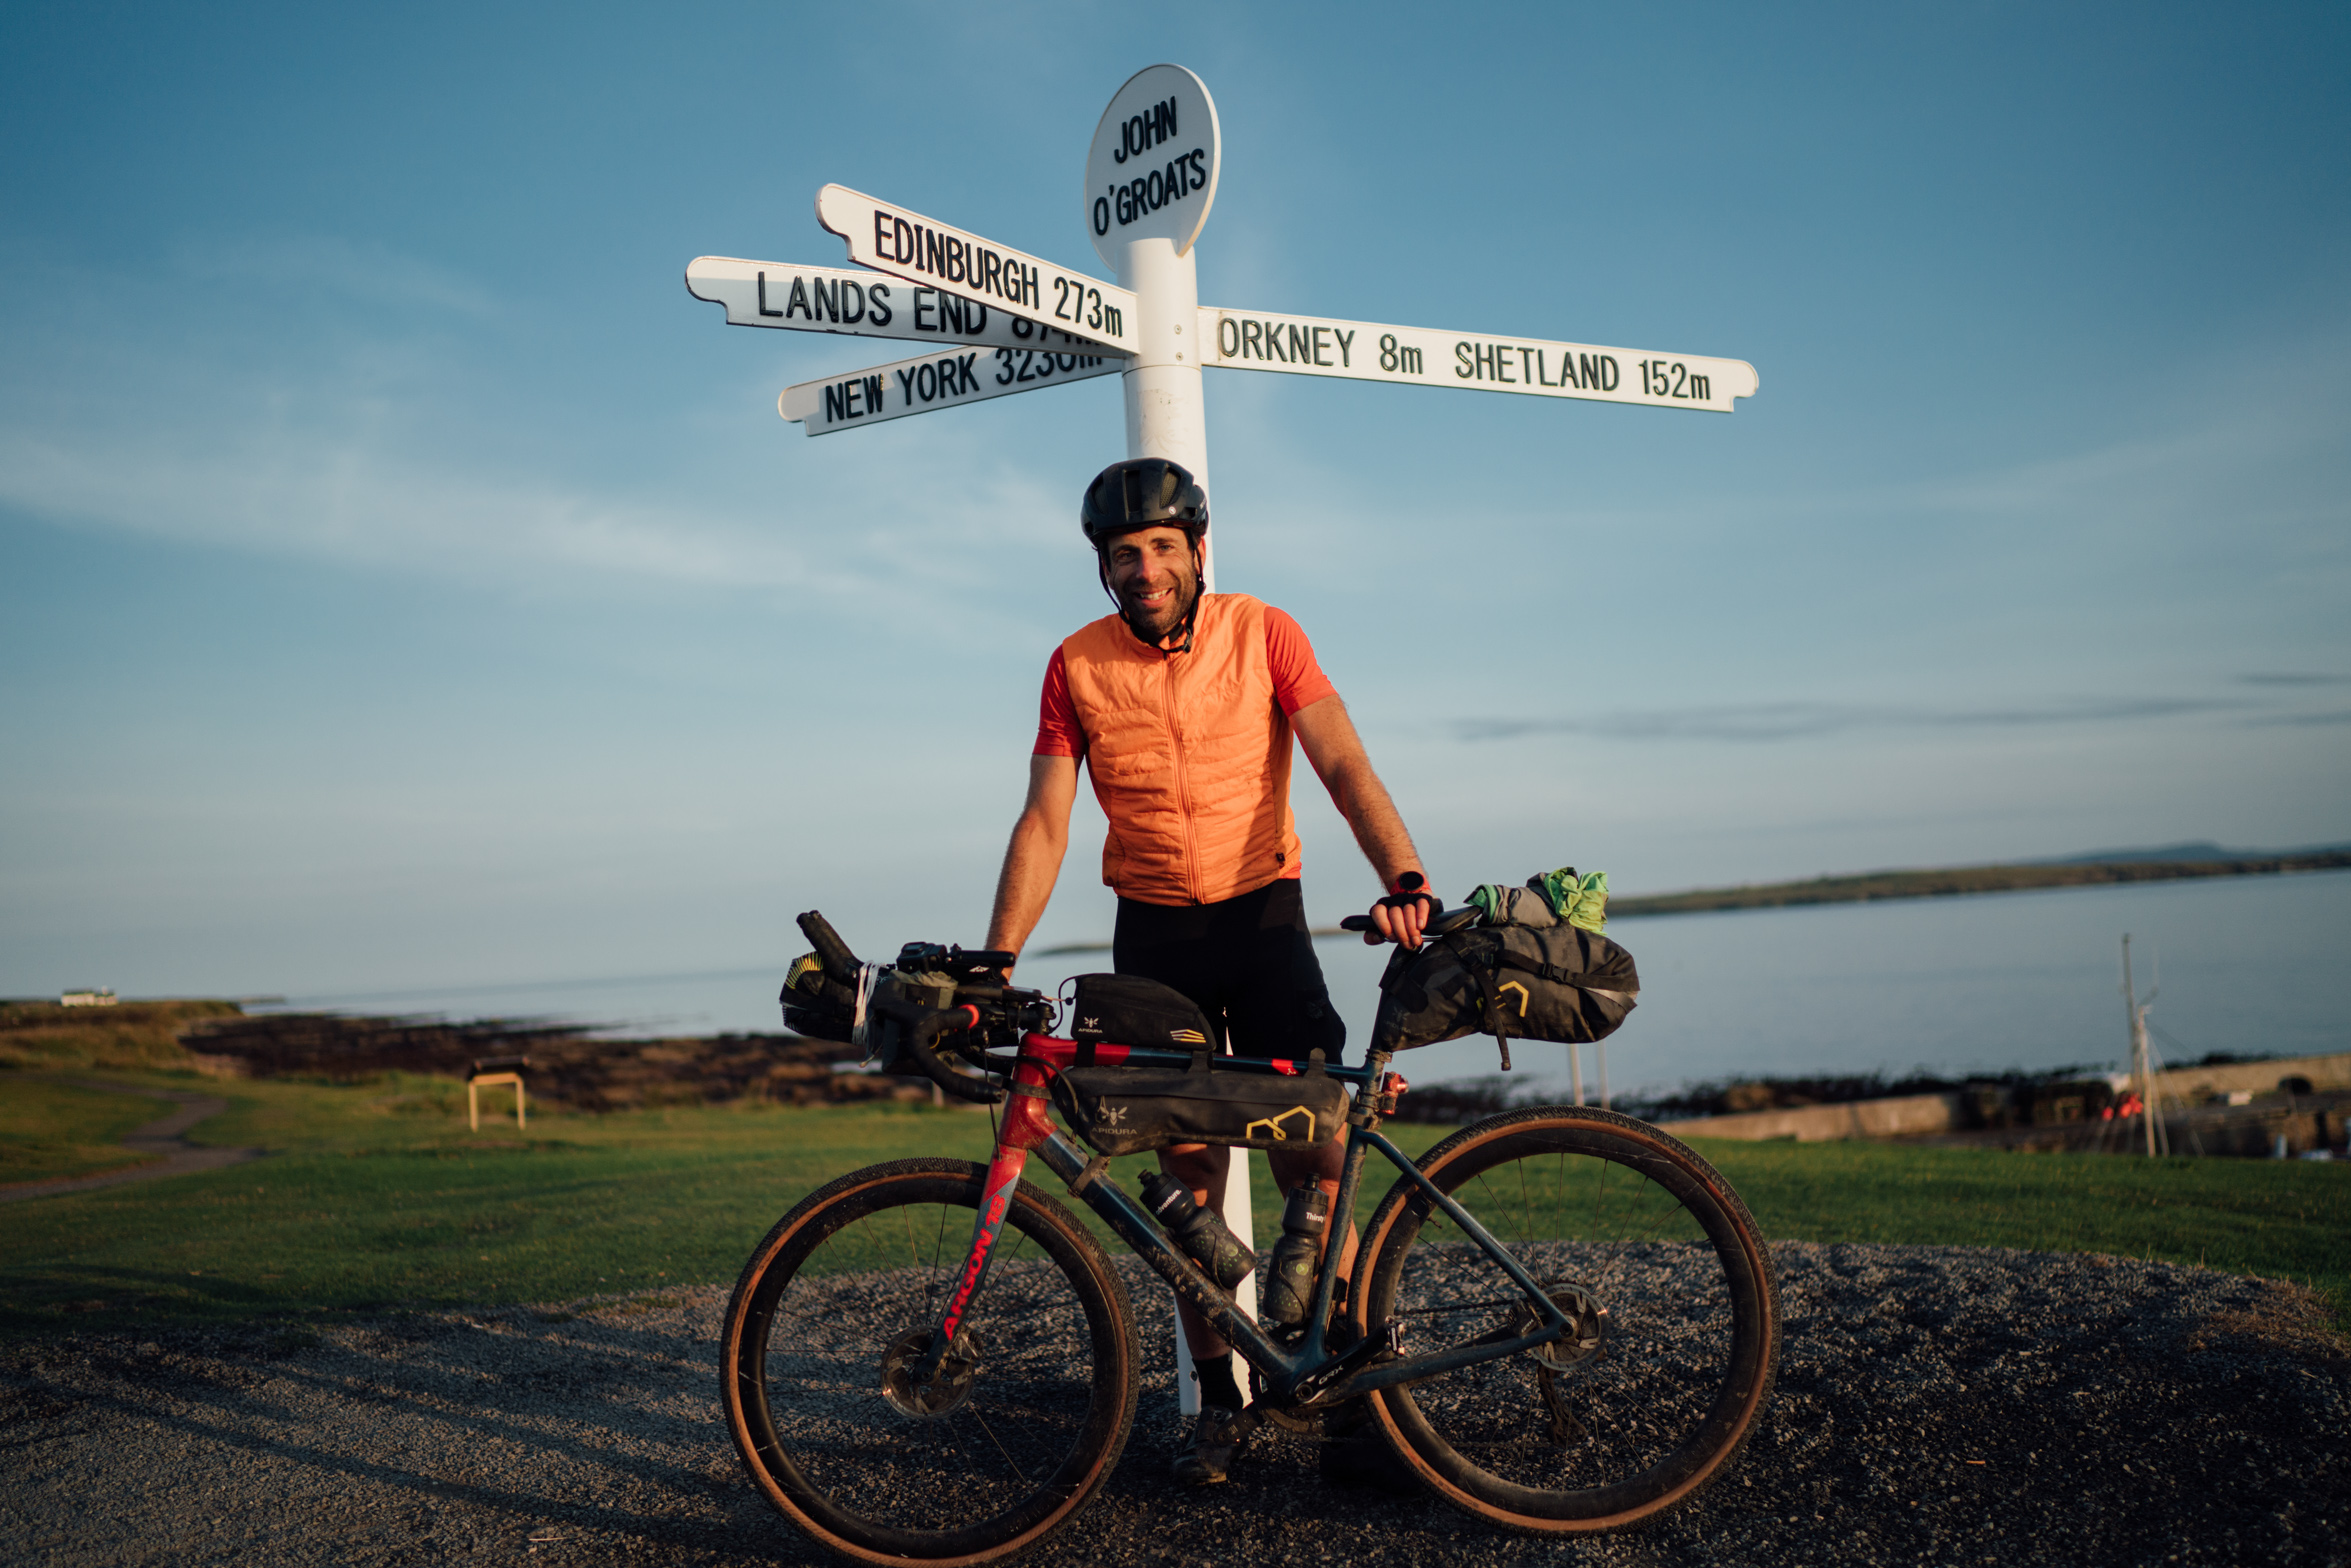 A man in orange stands with bike under a road sigh in John O Groats, with the distance to various other destinations on the multi-pronged sign post. The sea sits behind him, blurred